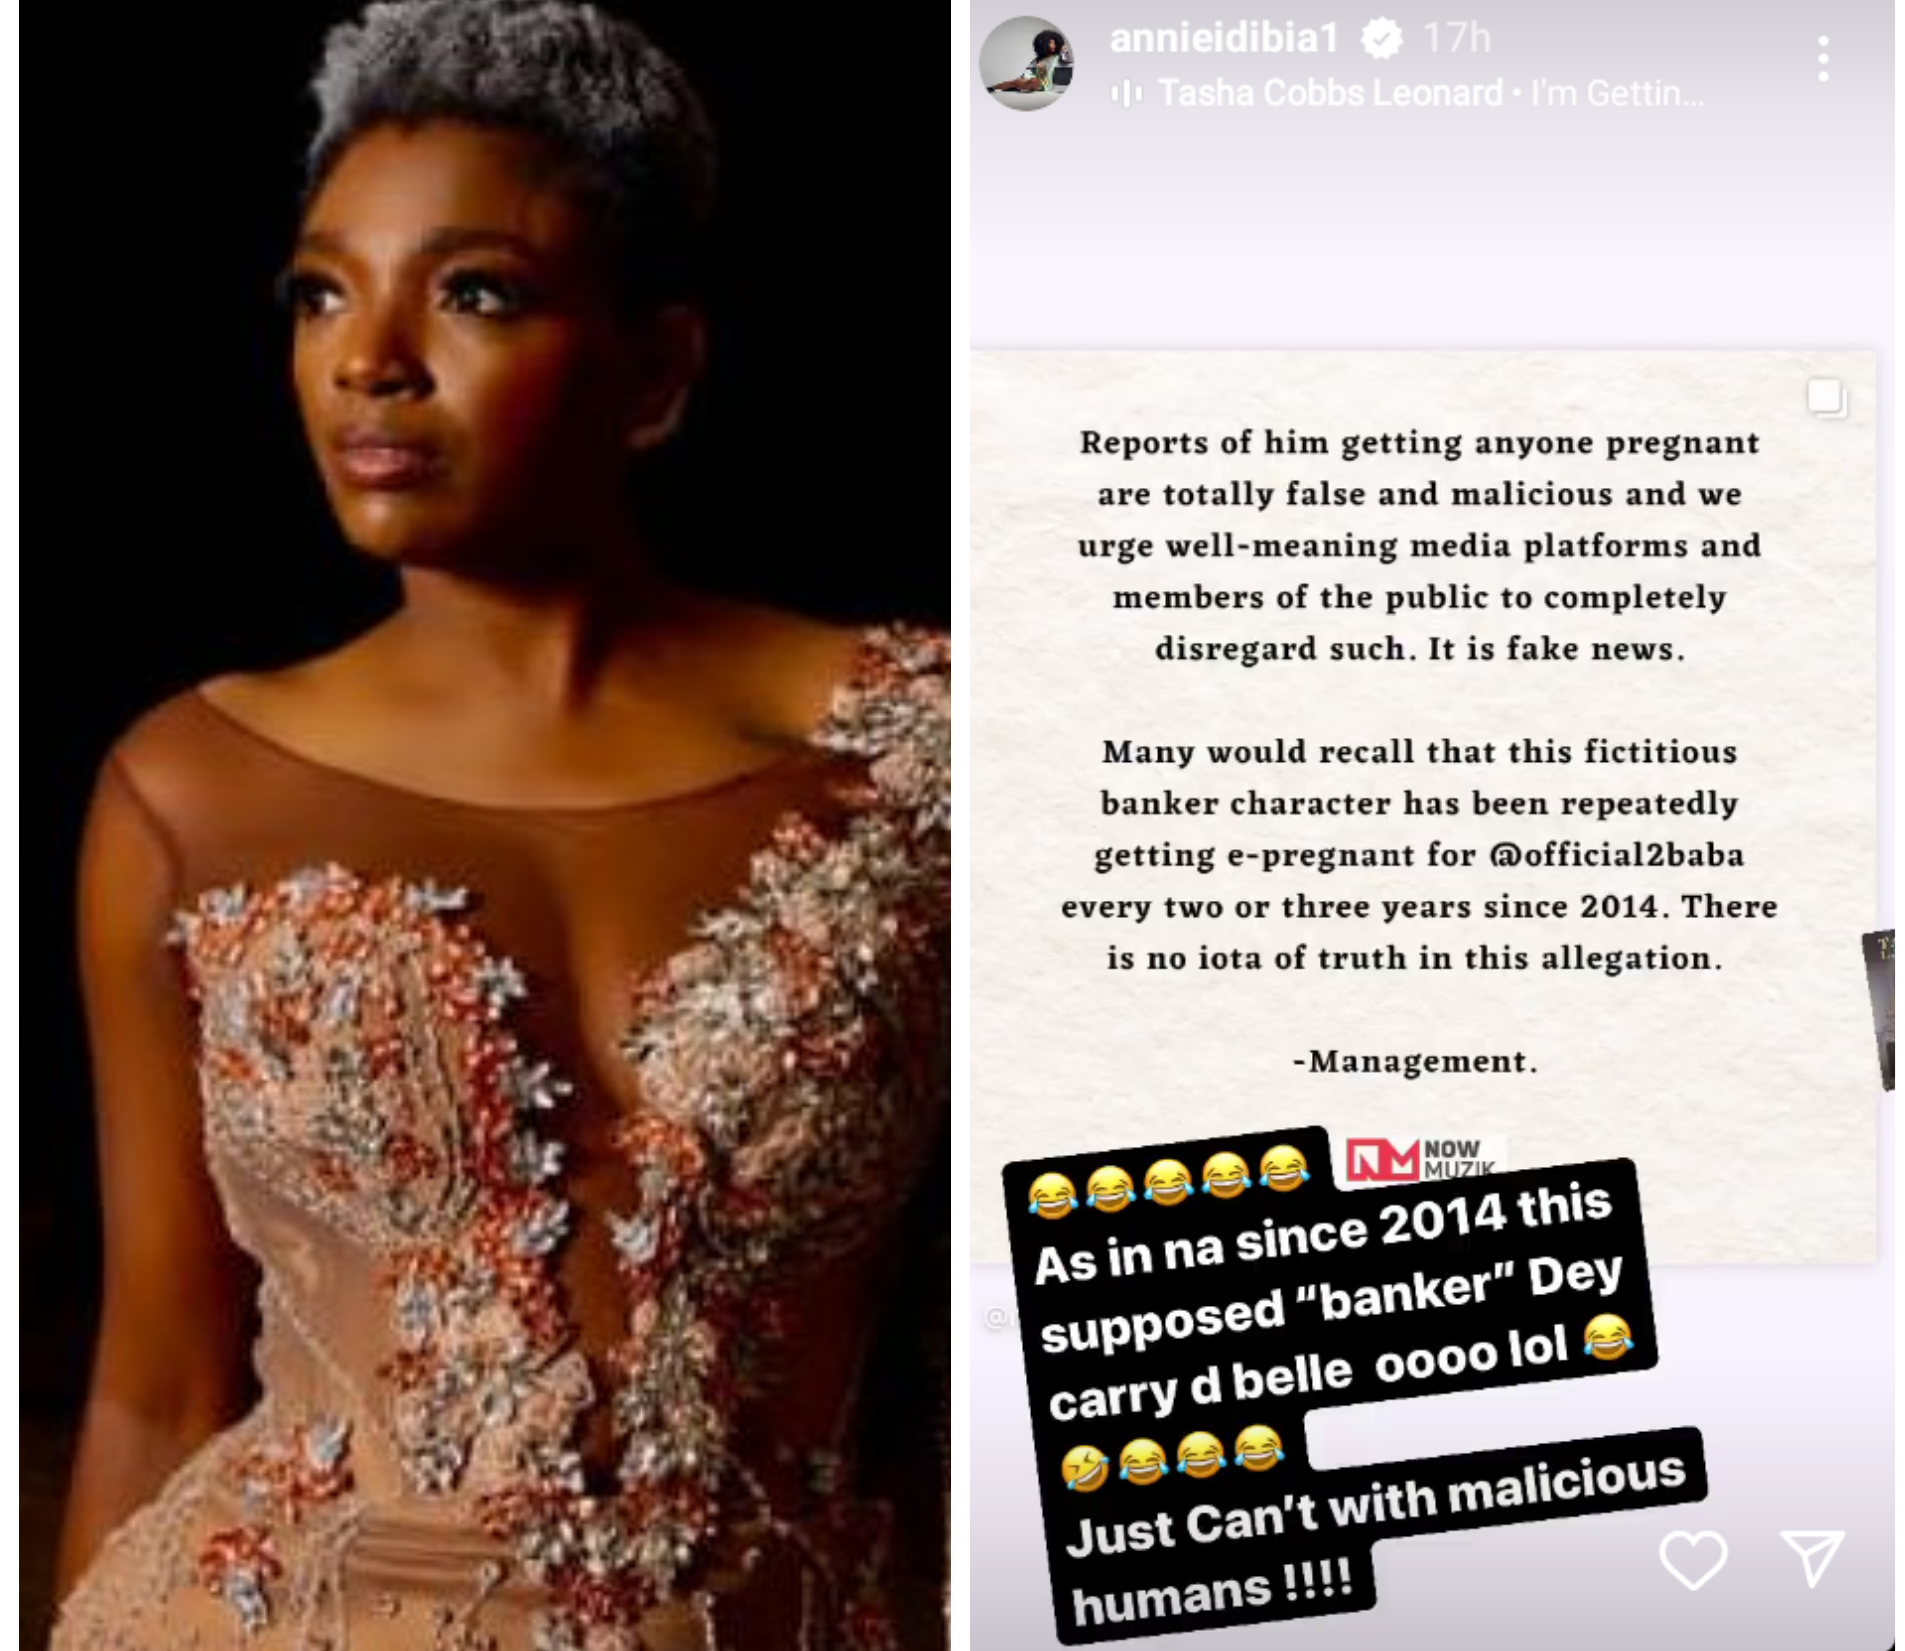 Na since 2014 this supposed banker dey carry belle - Annie Idibia reacts to rumour of Tuface impregnating another woman